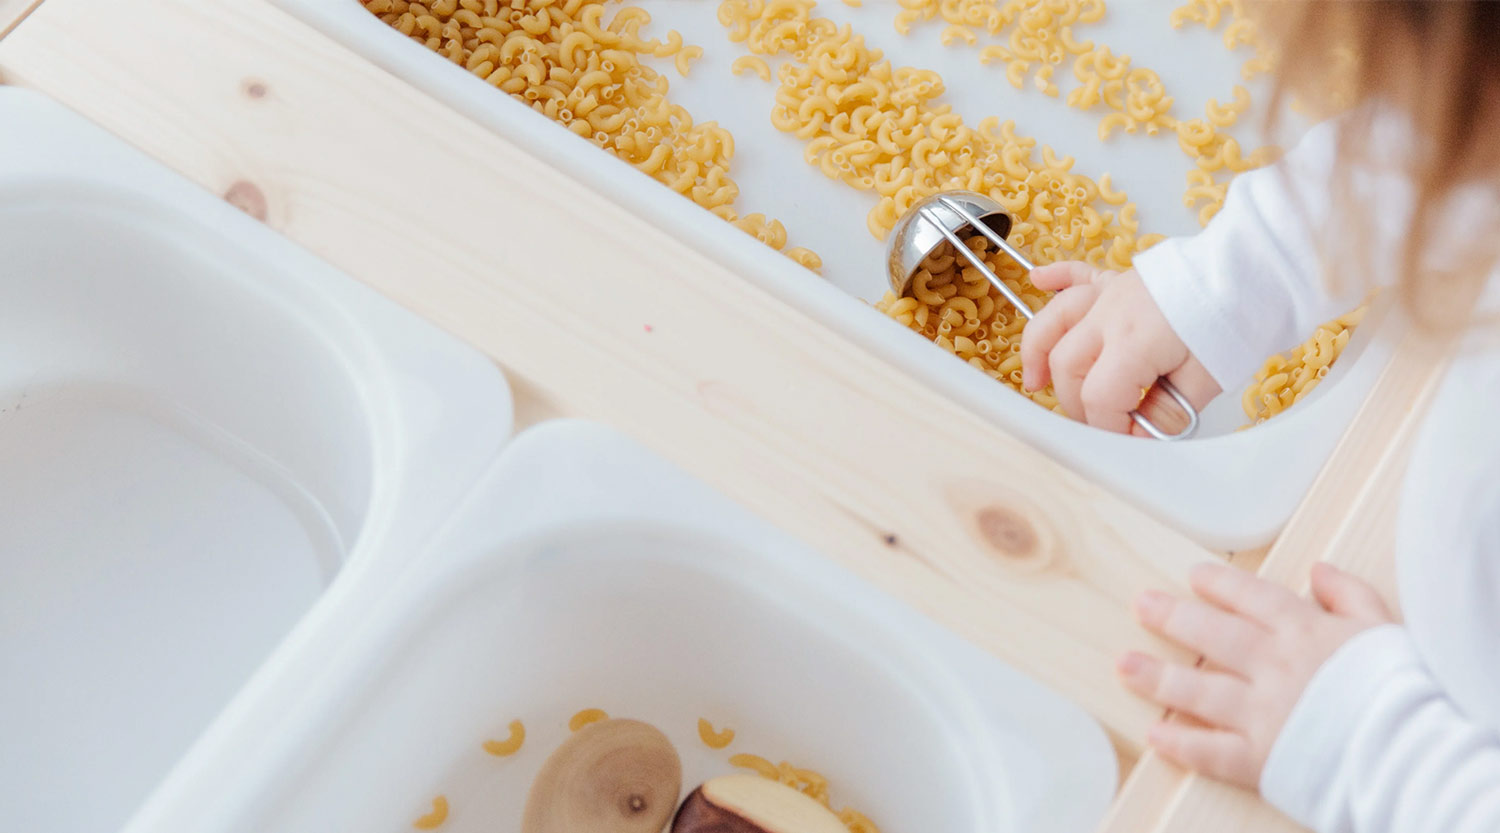 DIY Sensory Activities for Toddlers